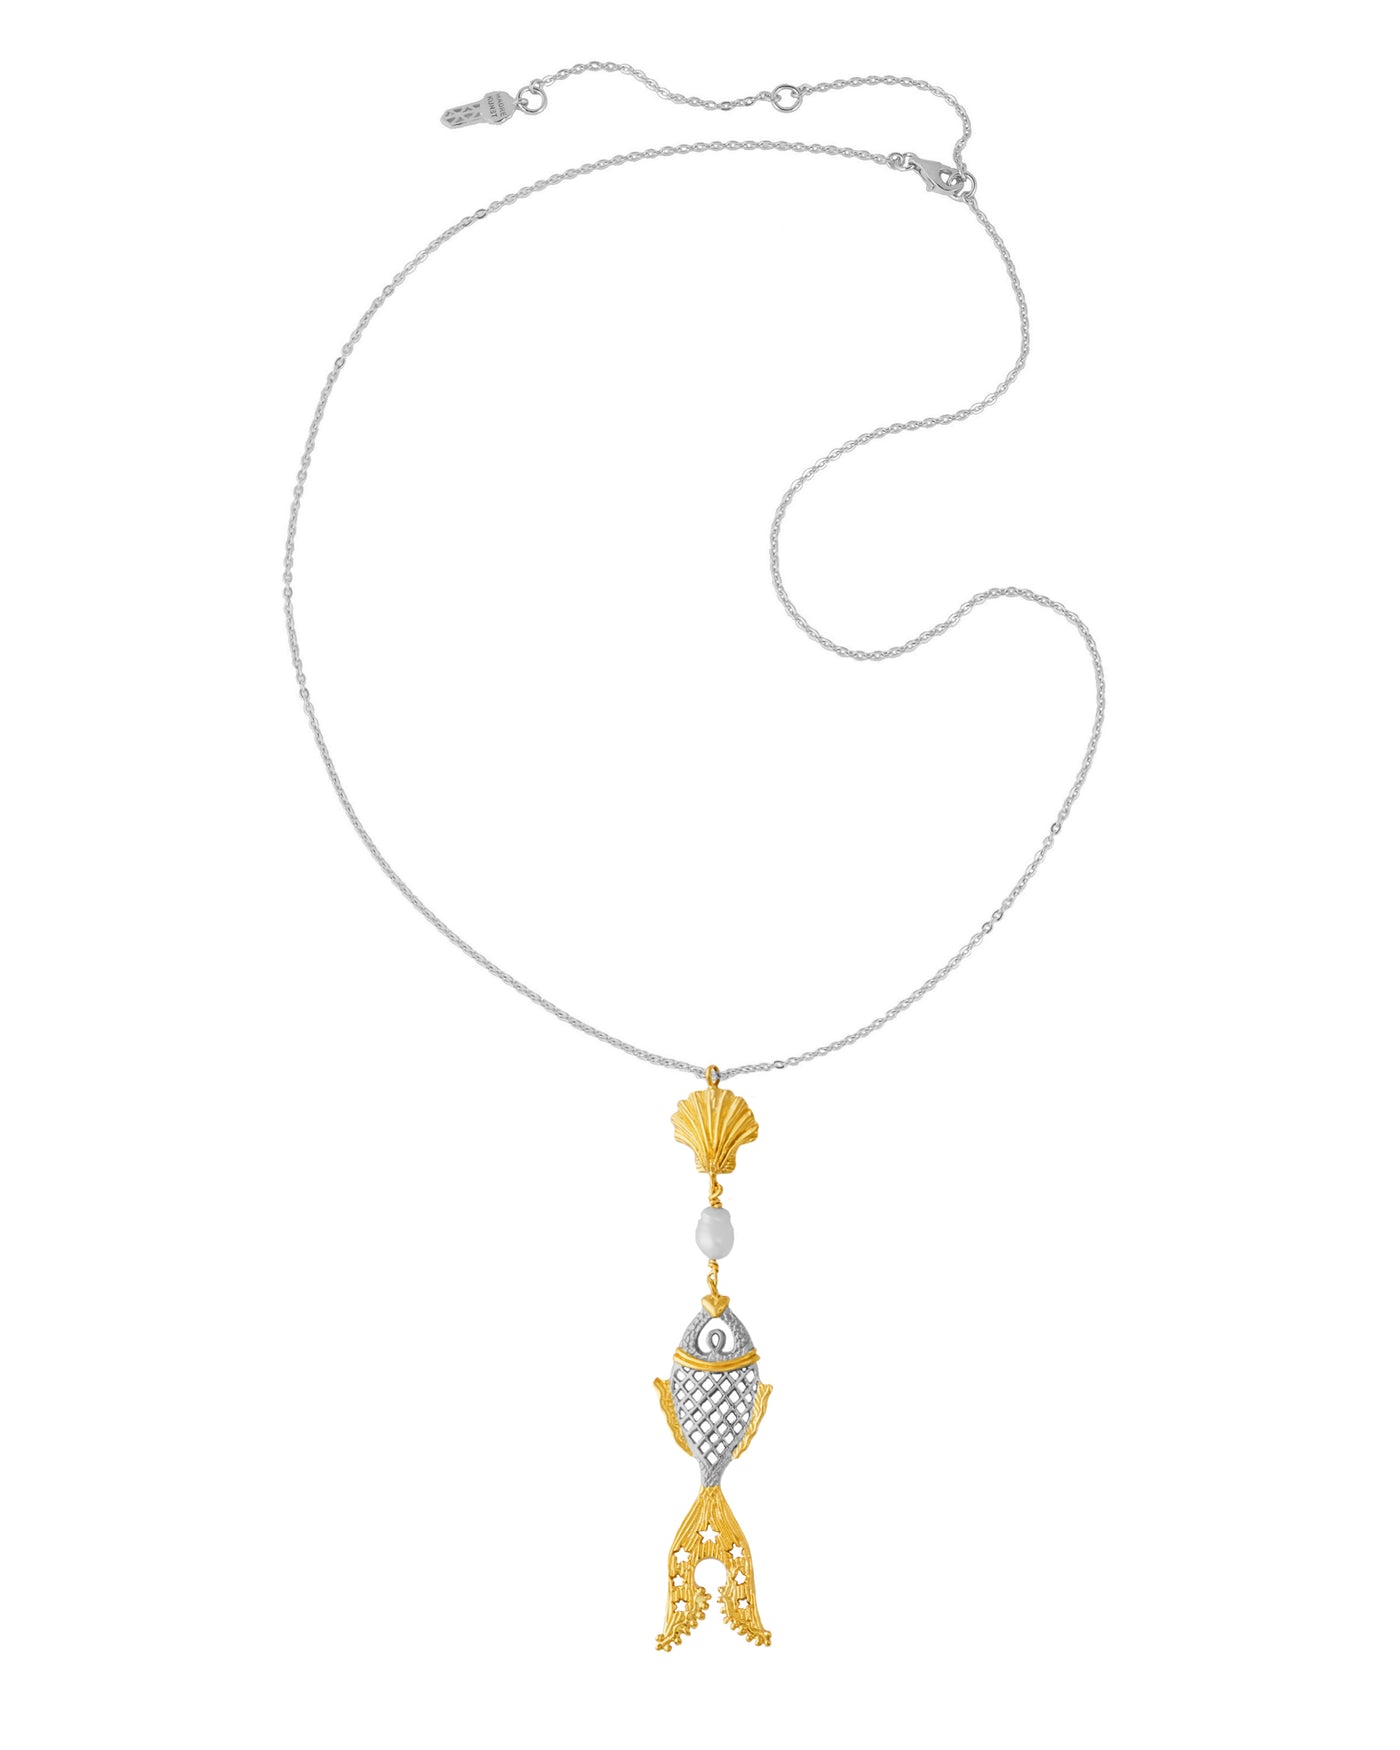 Golden fish with clam and pearl necklace. Silver, partly gold-plated